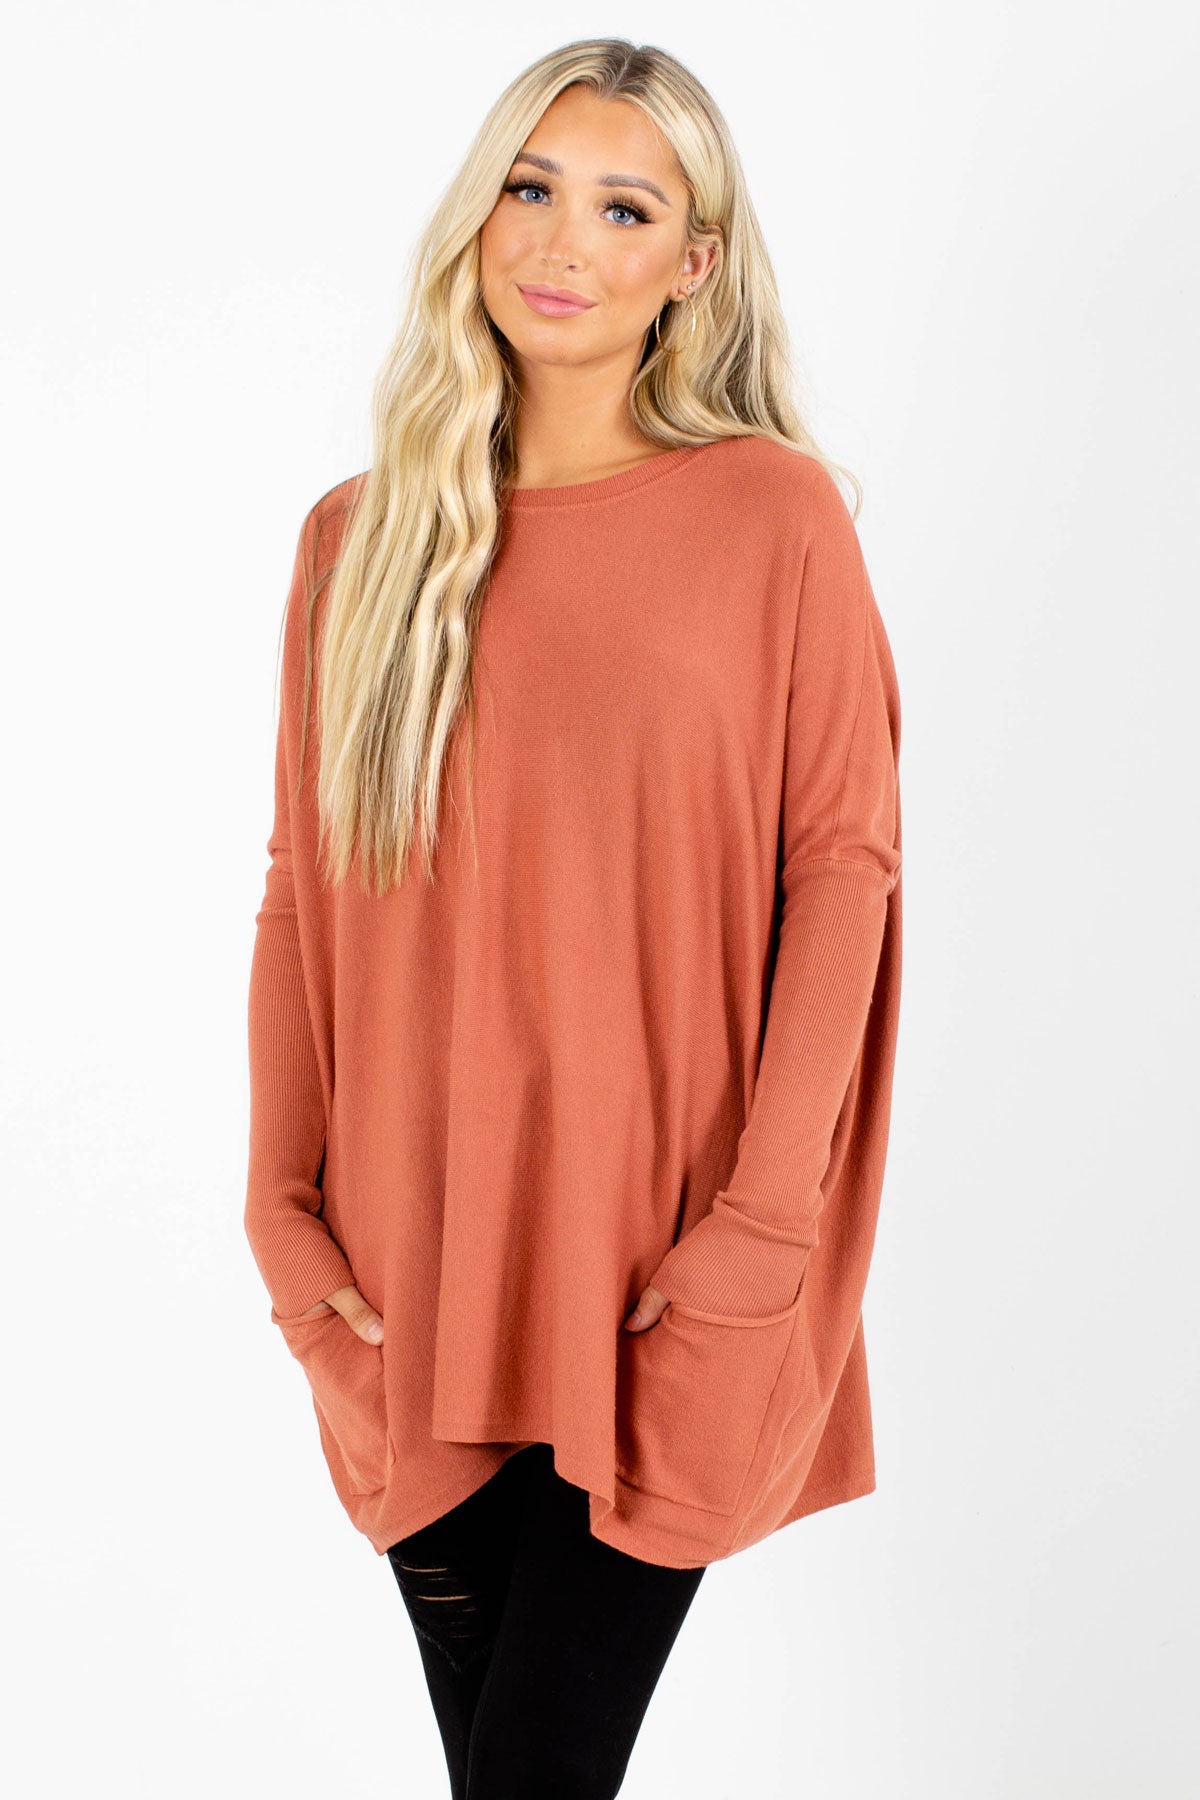 Pink Cute and Comfortable Boutique Sweaters for Women